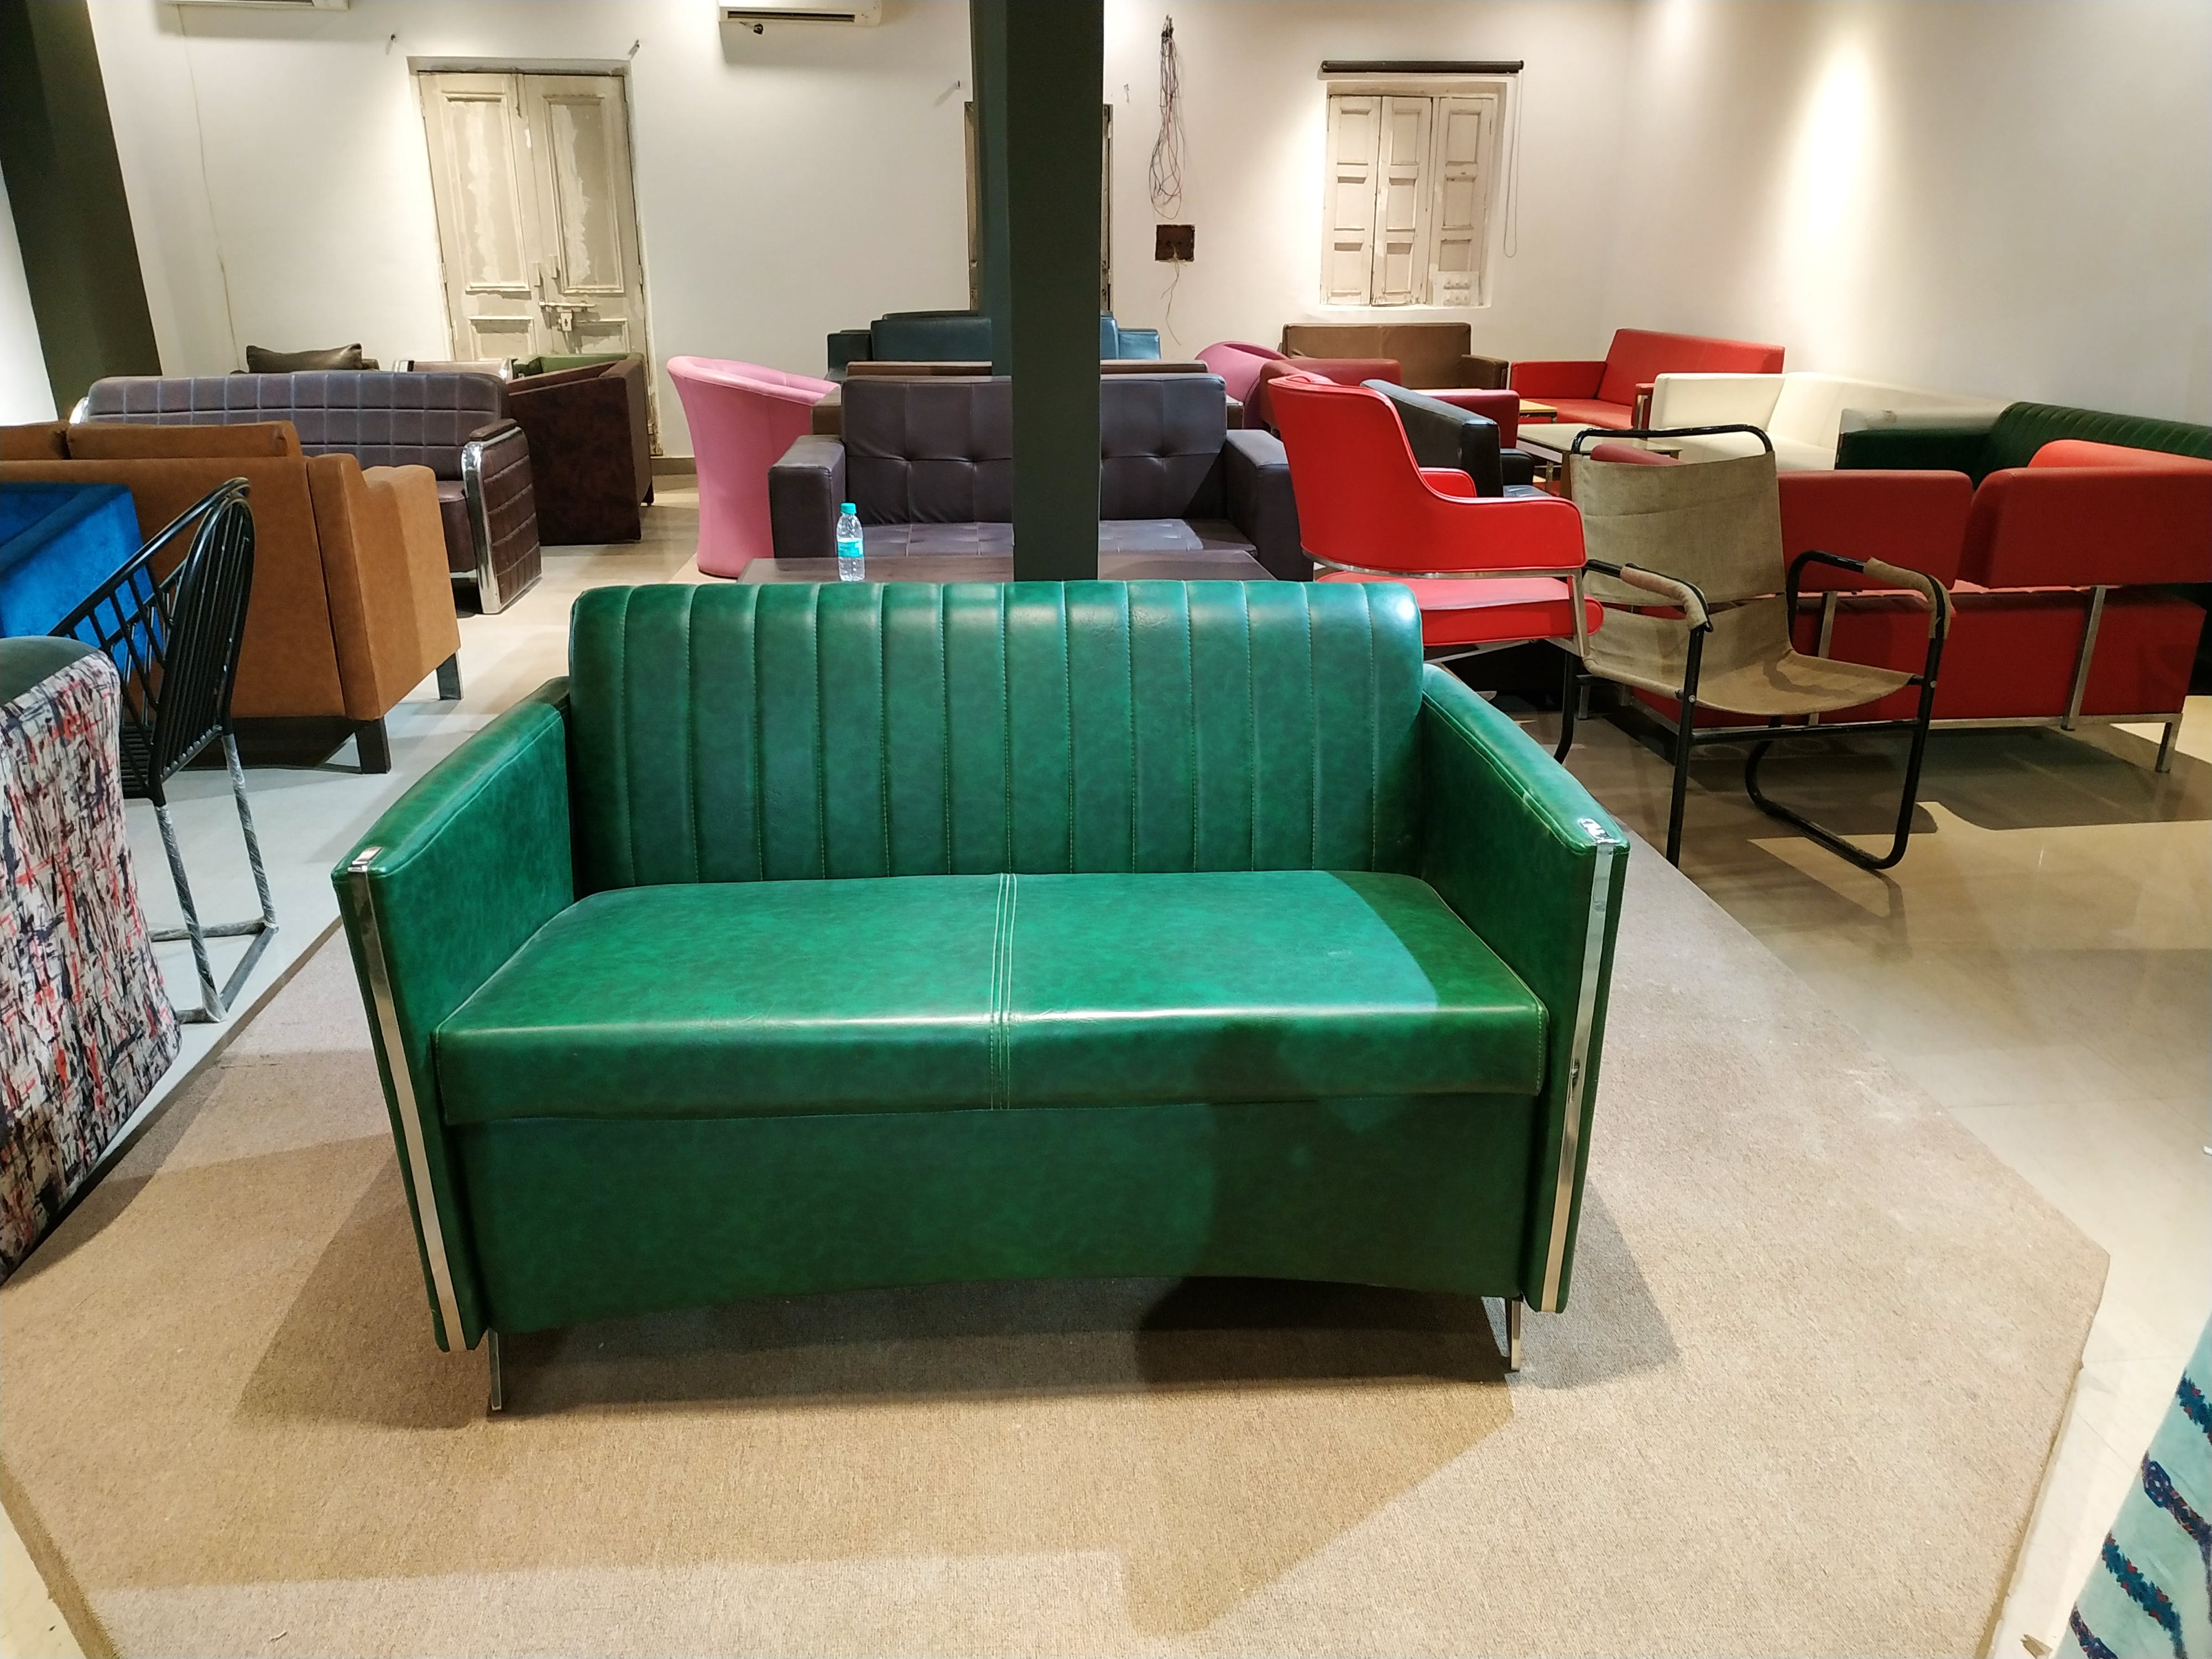 Green,Furniture,Room,Property,Couch,Interior design,Table,Waiting room,Architecture,Floor